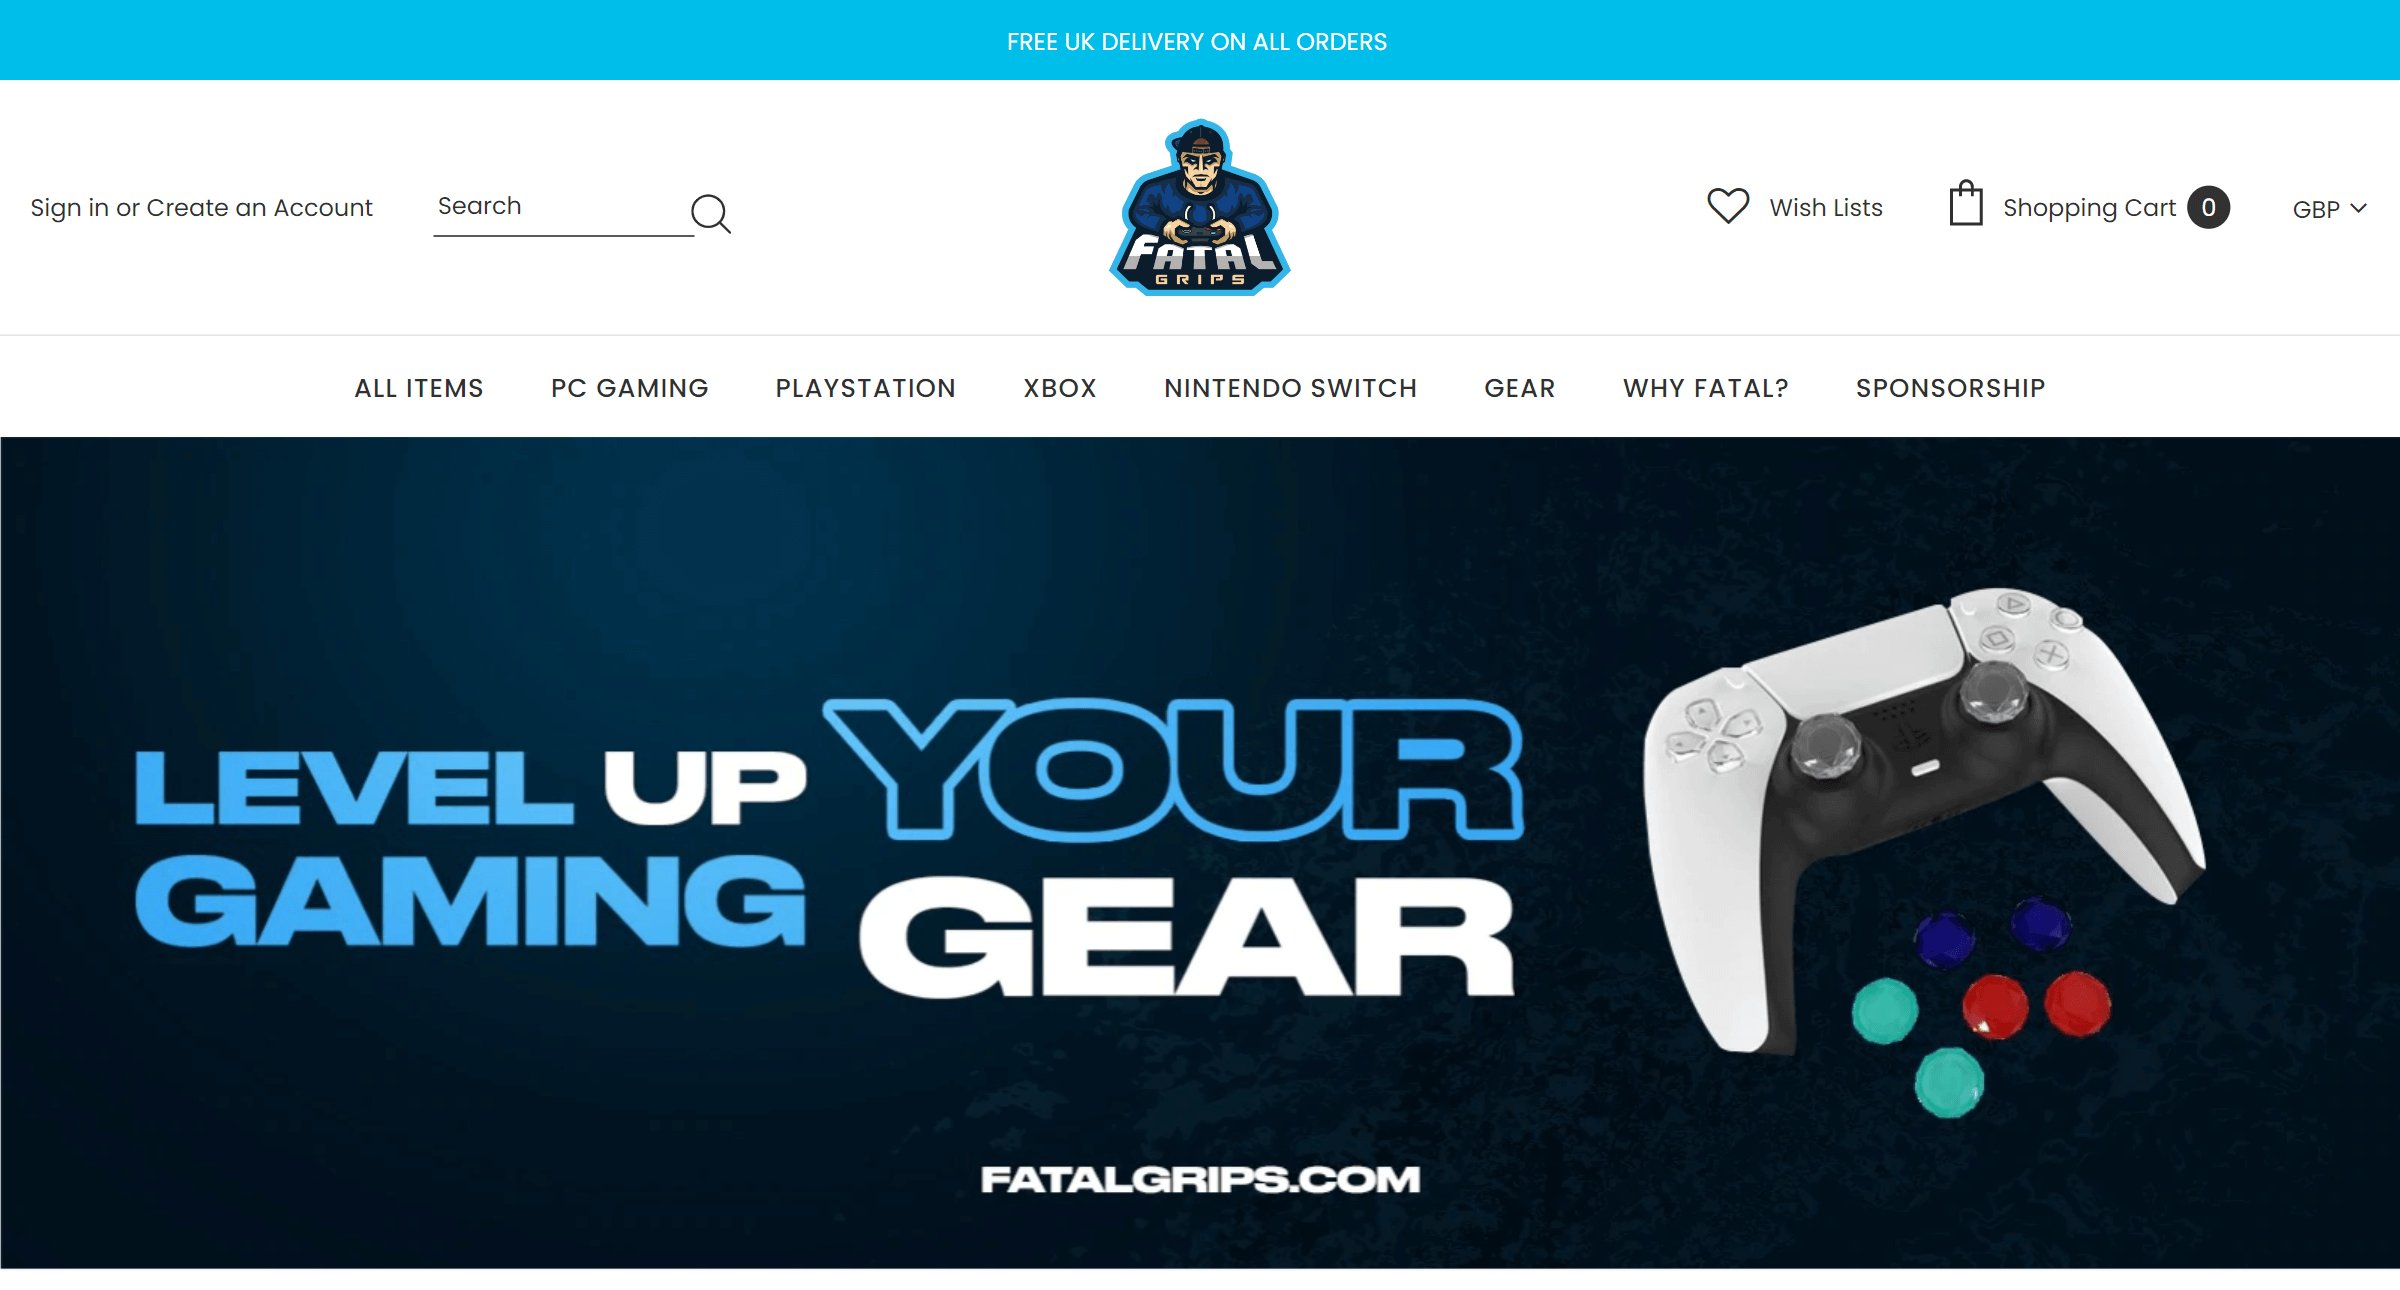 Fatalgrips on ReadSomeReviews